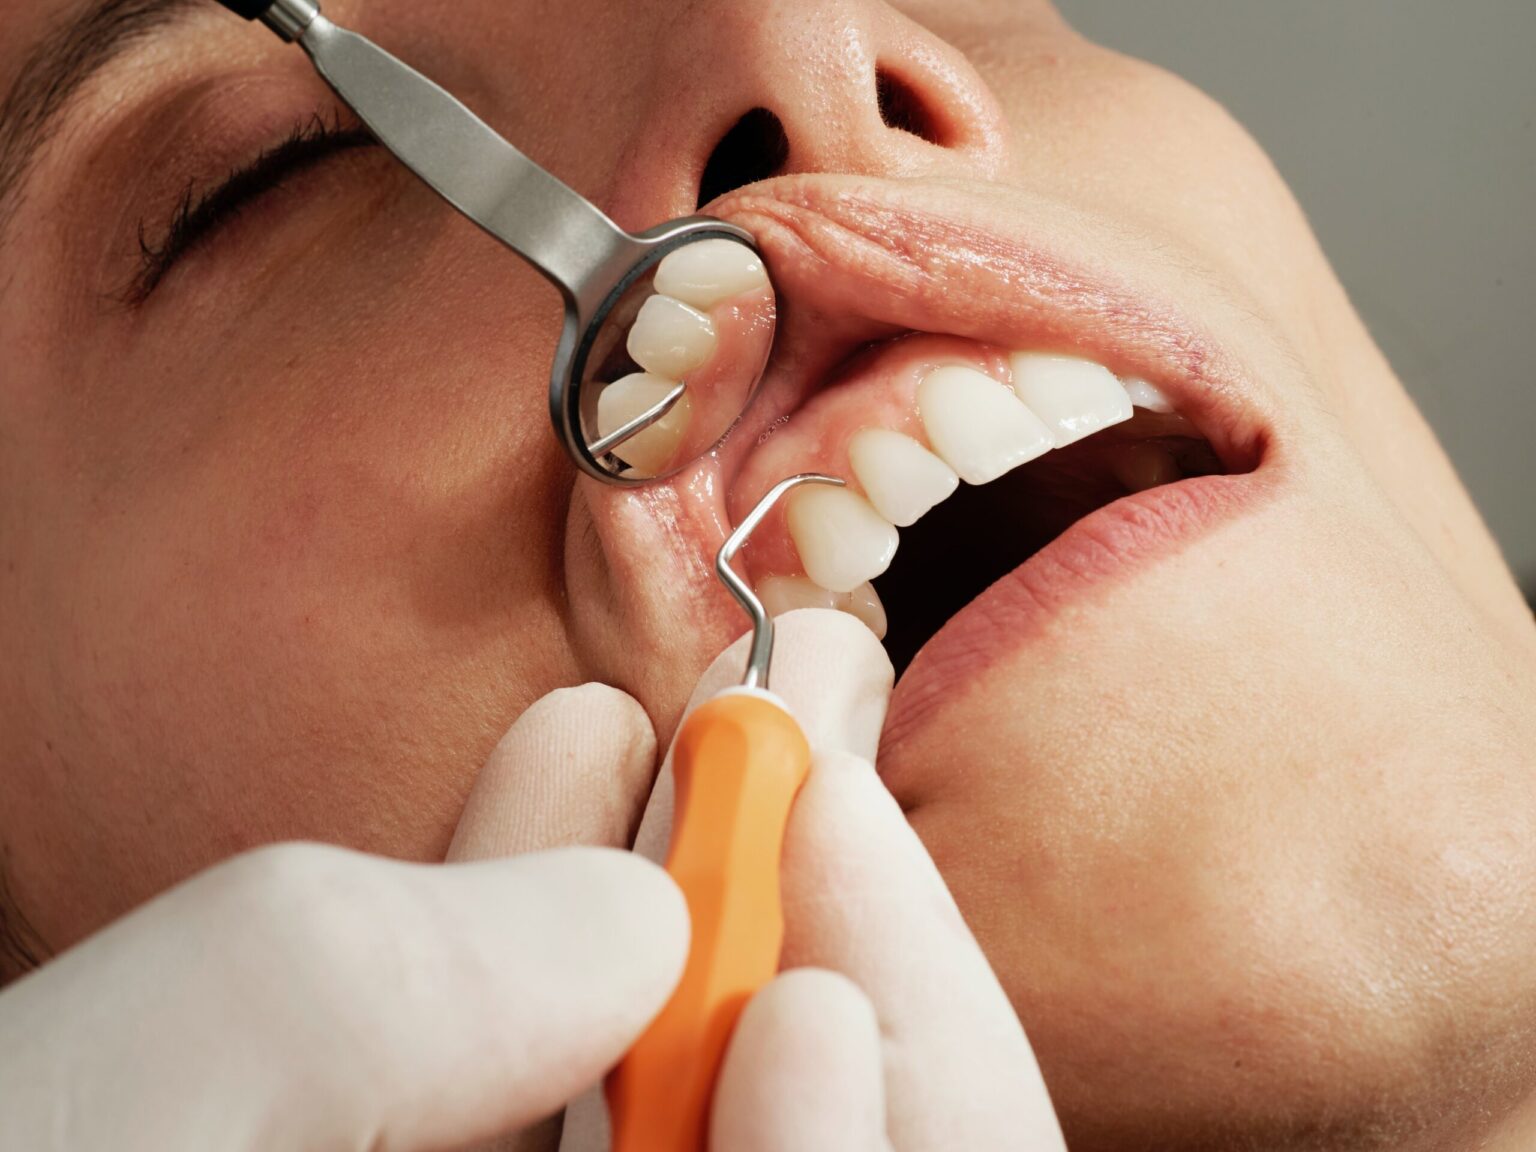 Dental examination at a Texas dentistry: a close-up of a patient's open mouth with dental instruments.